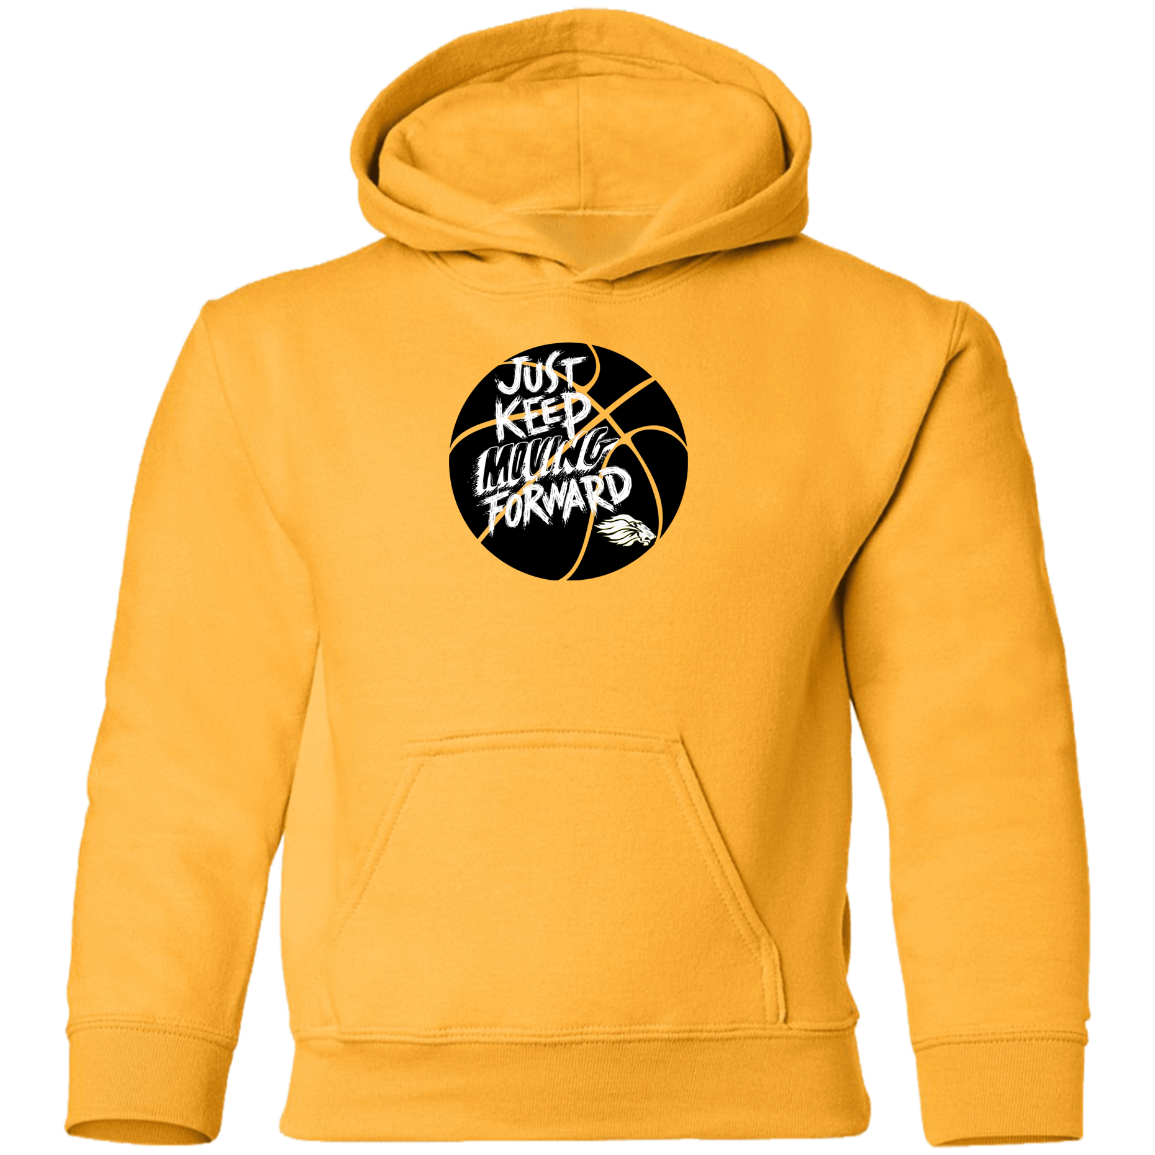 Just Keep Moving Forward- Youth Pullover Hoodie